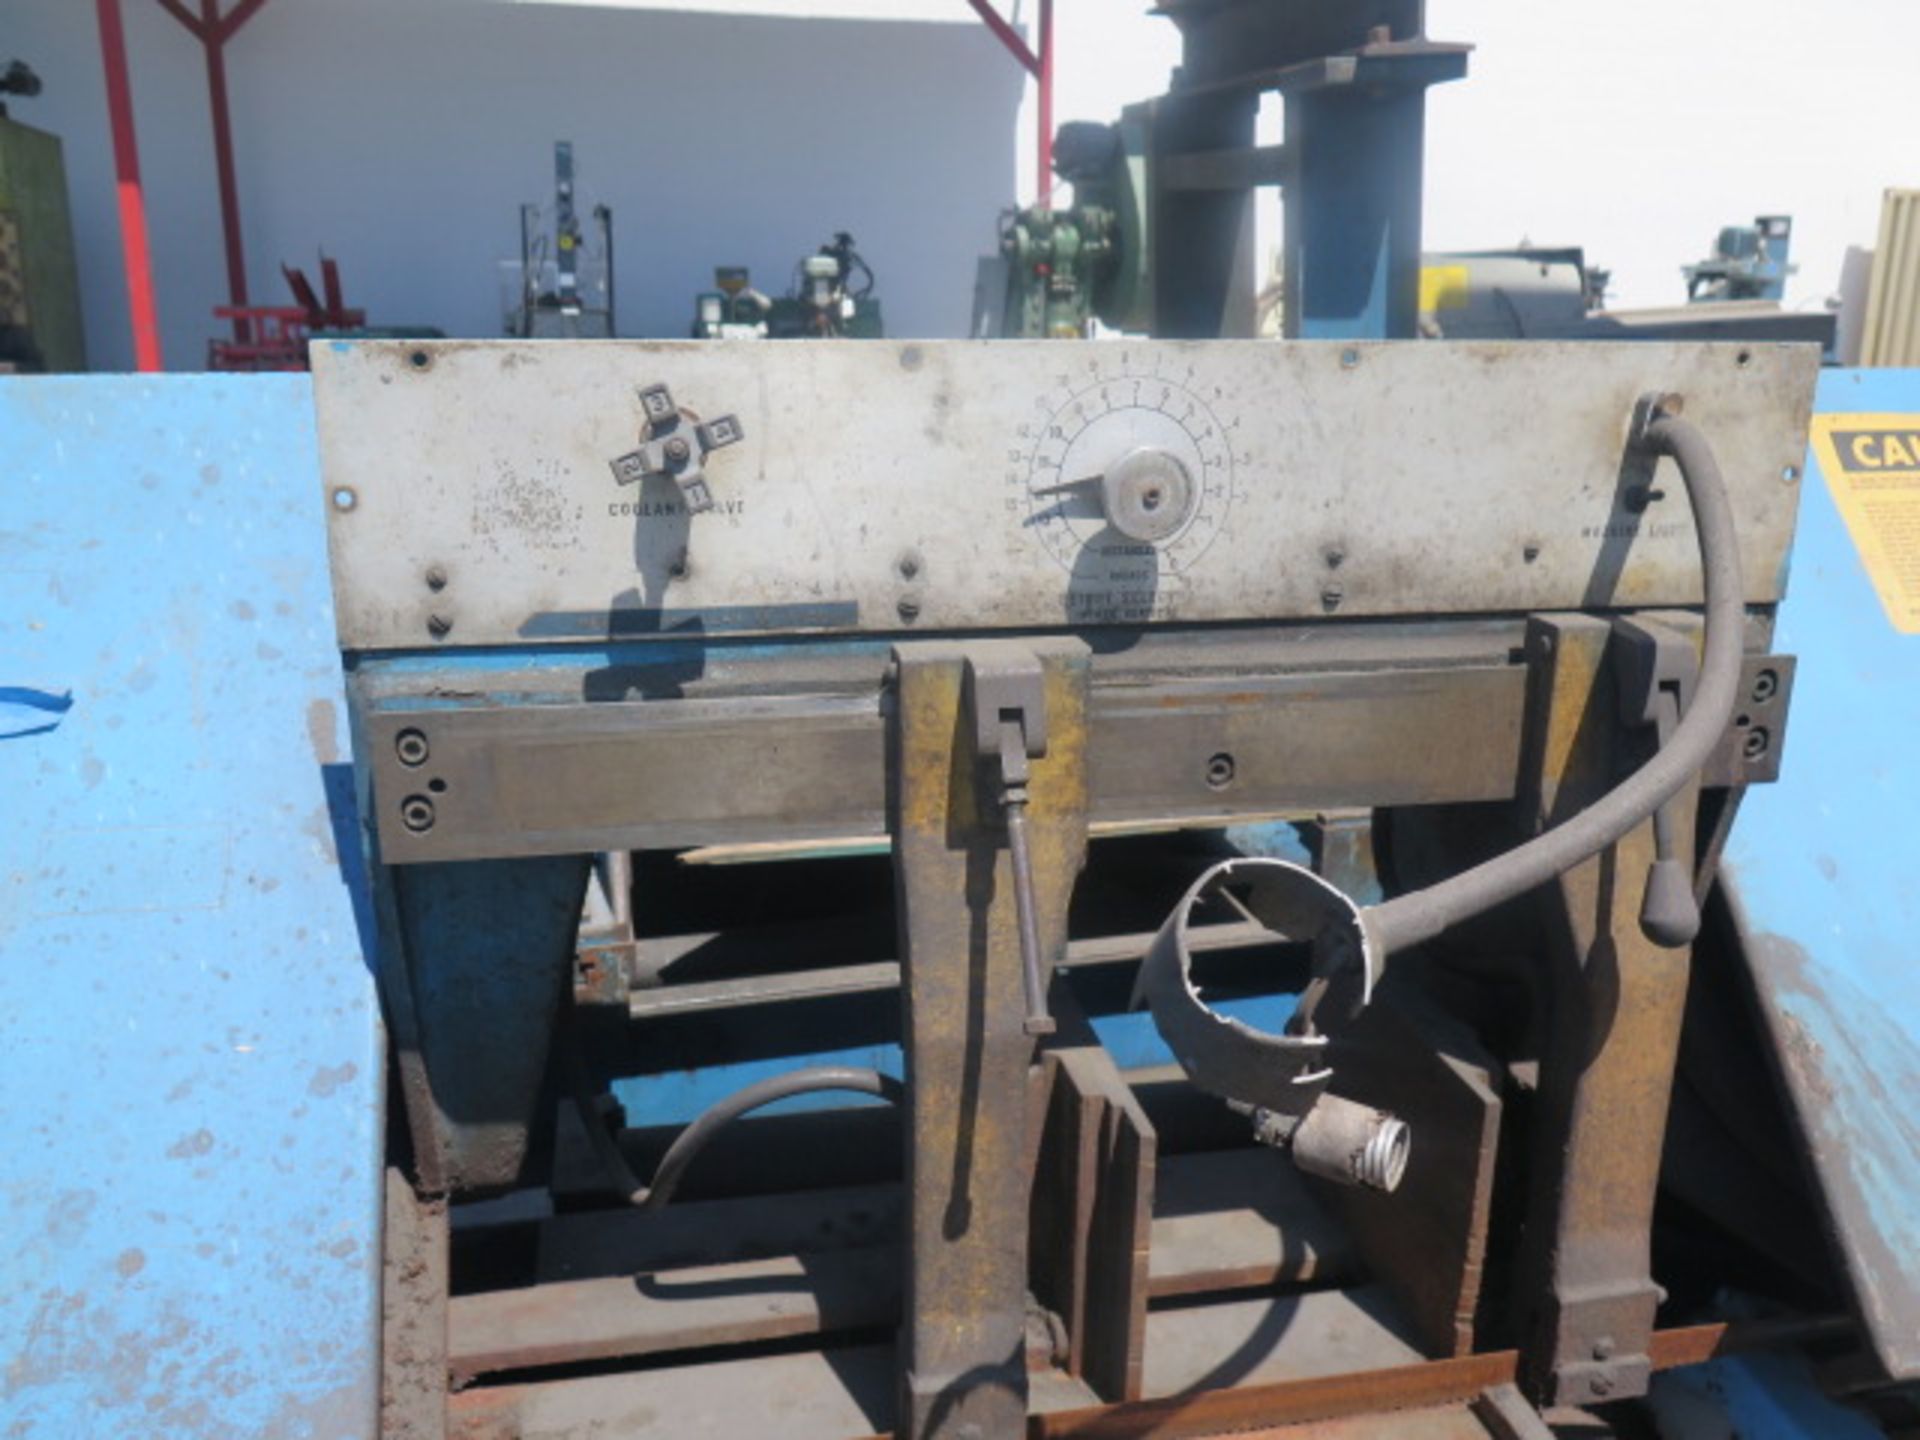 Marvel Series 15 mdl. 15A 15” Hydraulic Horizontal Band Saw s/n D-15638 w/ Marvel Controls - Image 4 of 7